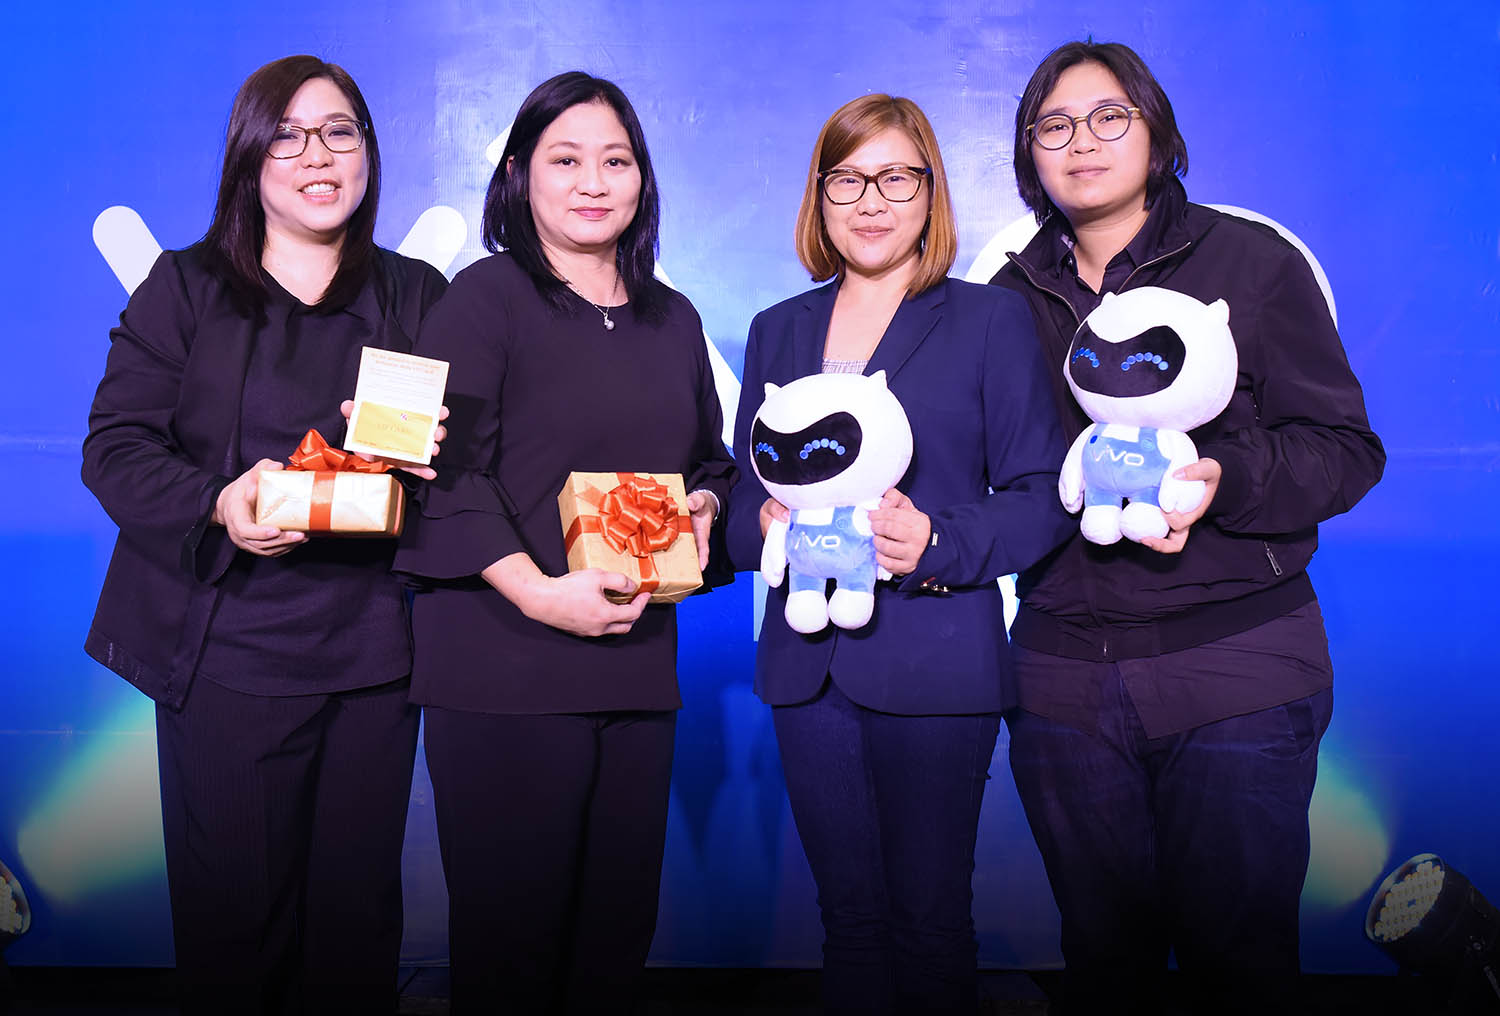 Vivo partners with Robinsons Malls to seal a long-term partnership